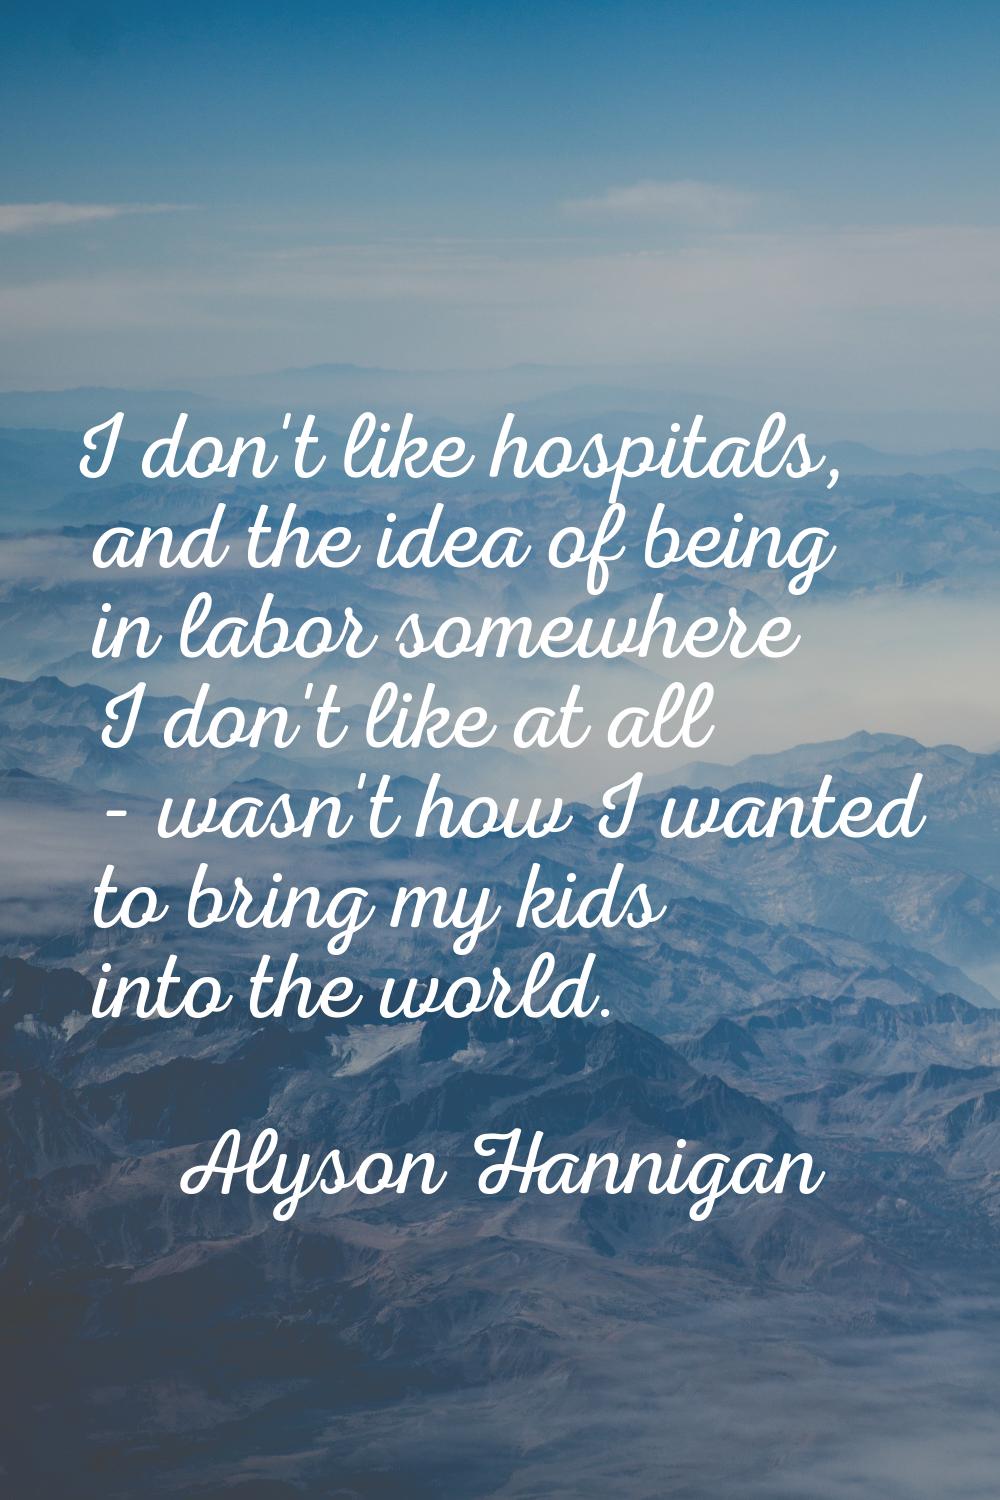 I don't like hospitals, and the idea of being in labor somewhere I don't like at all - wasn't how I